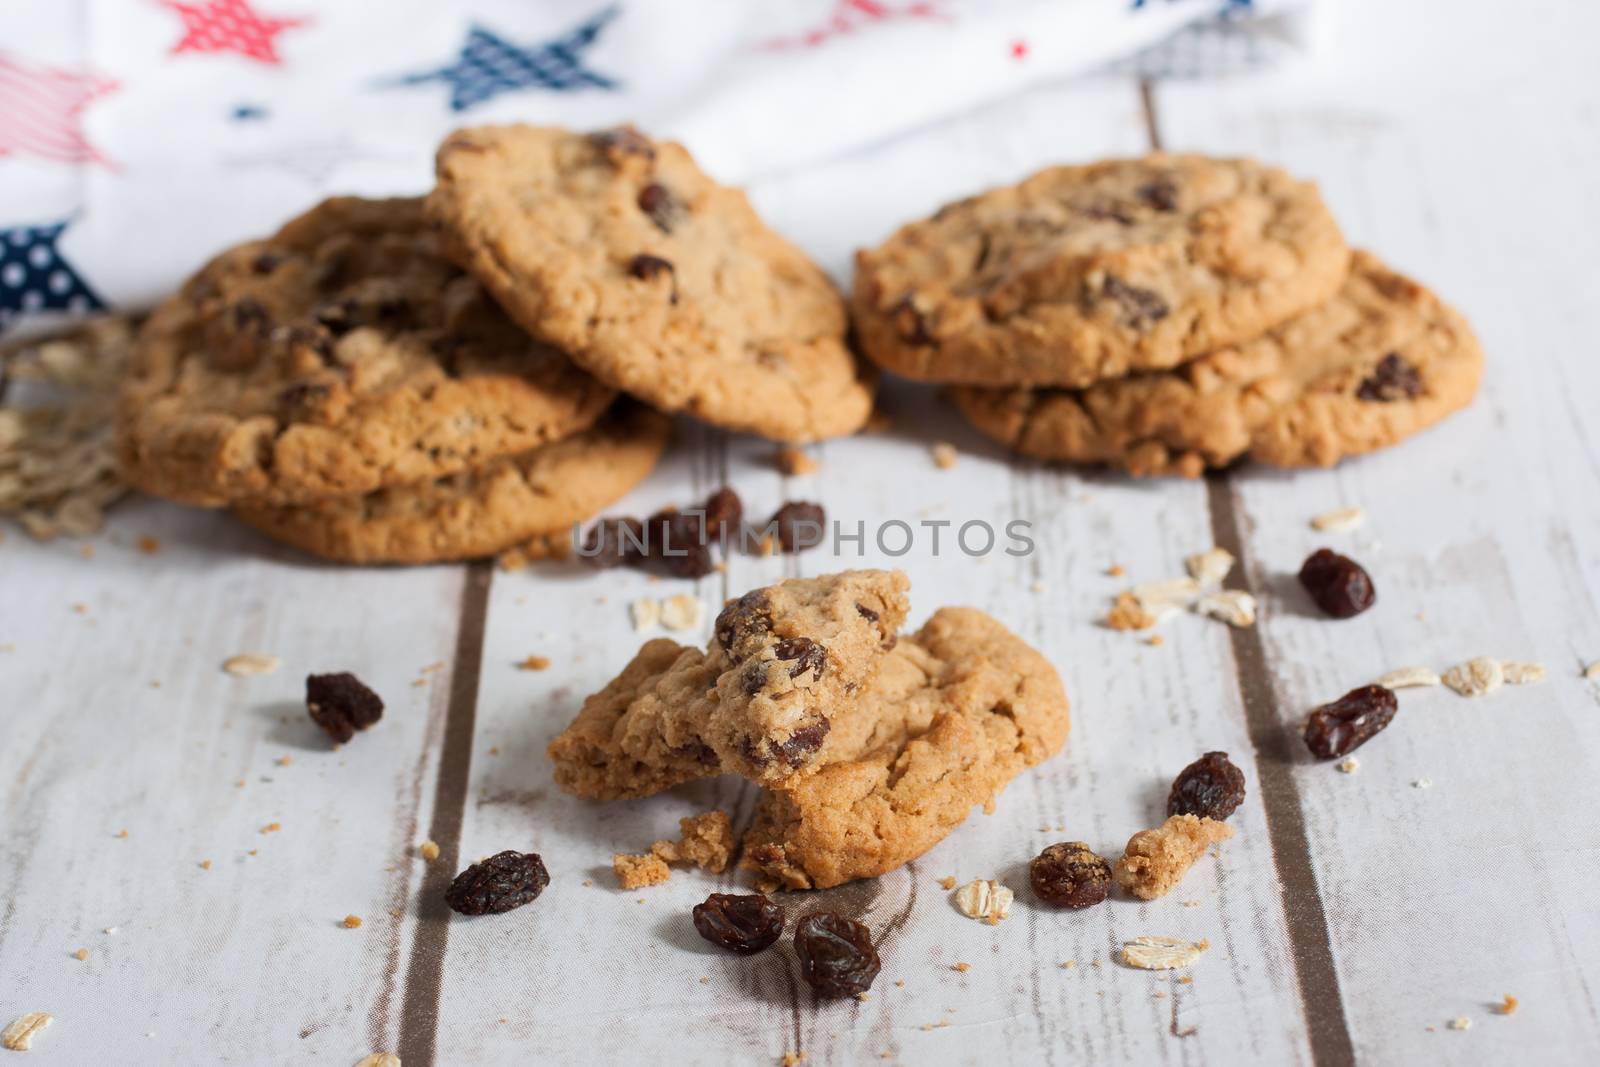 Oatmeal raisin cookies on a table with a printed tea towel in the background.